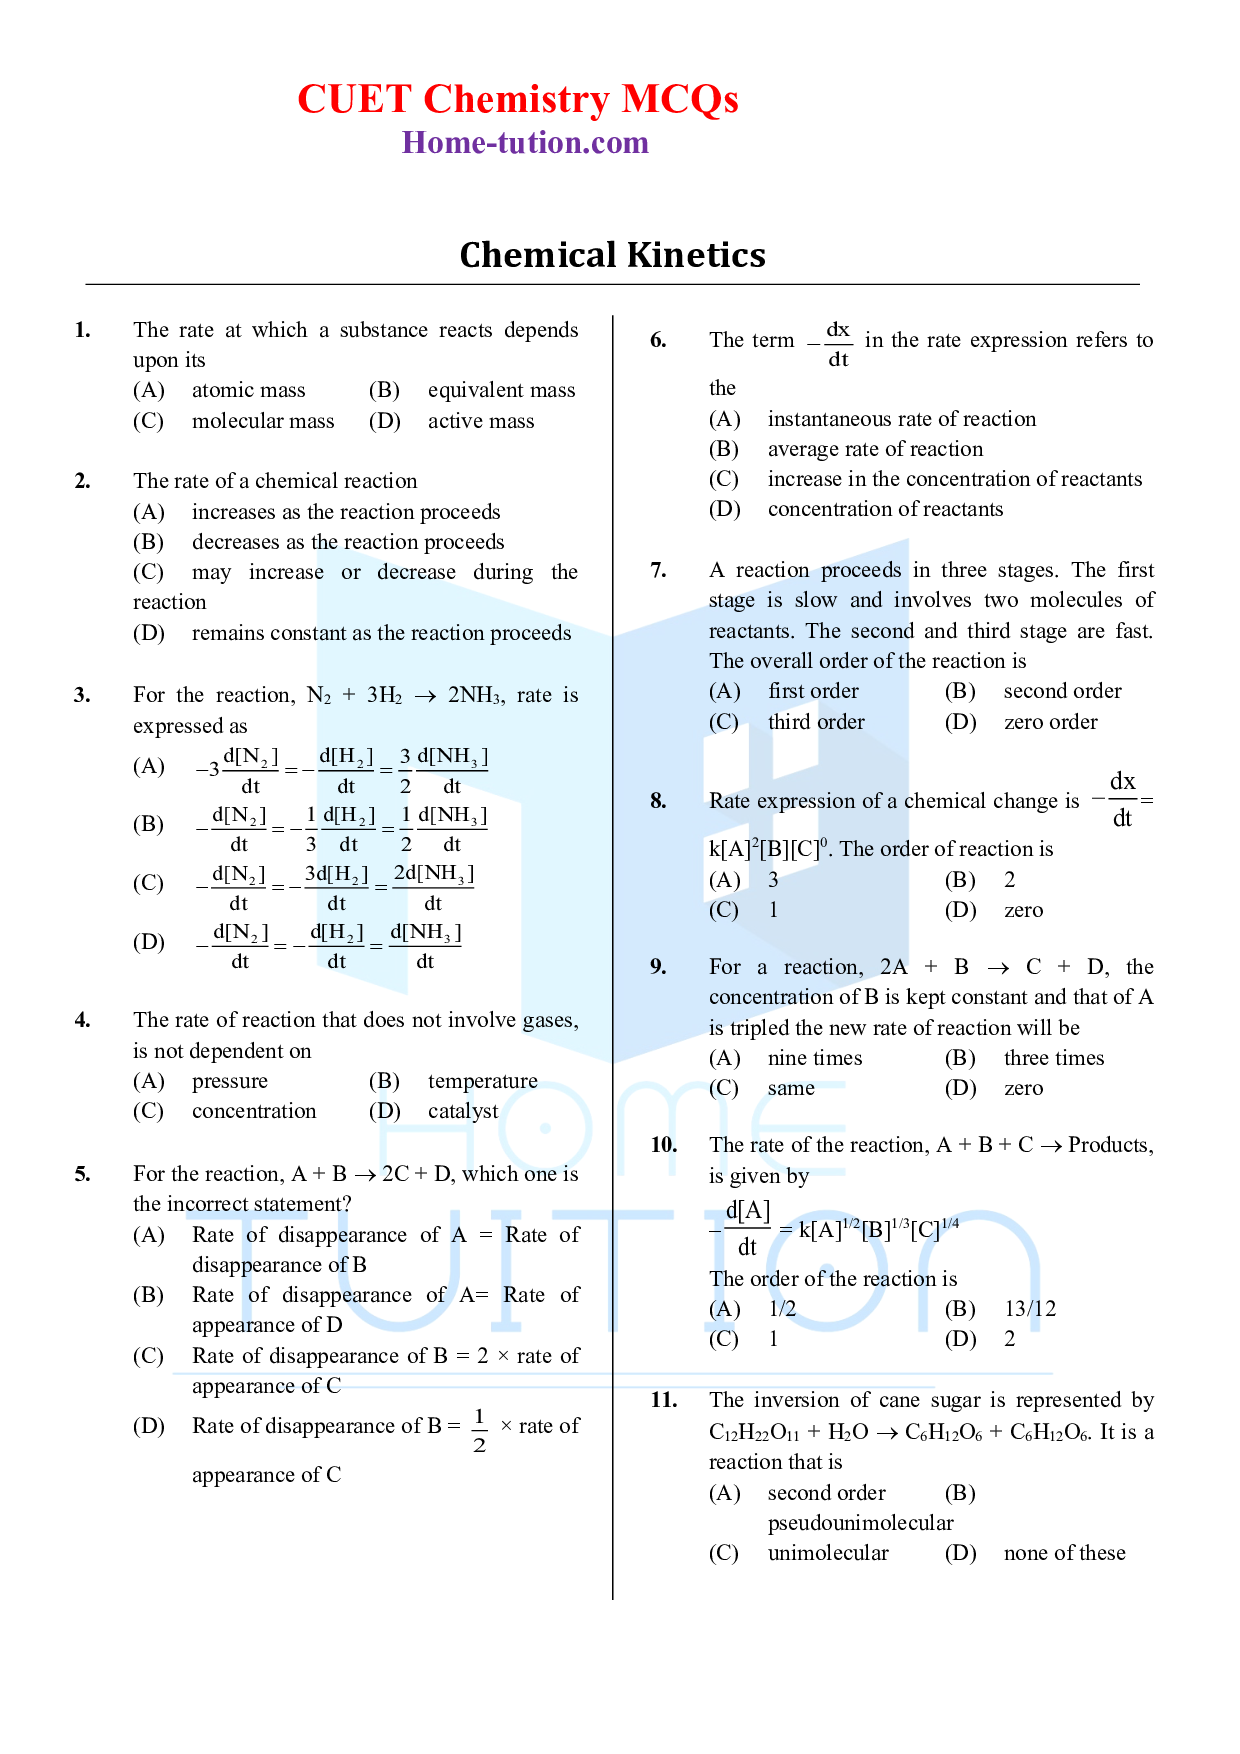 CUET MCQ Questions For Chapter-04 Chemical Kinetics